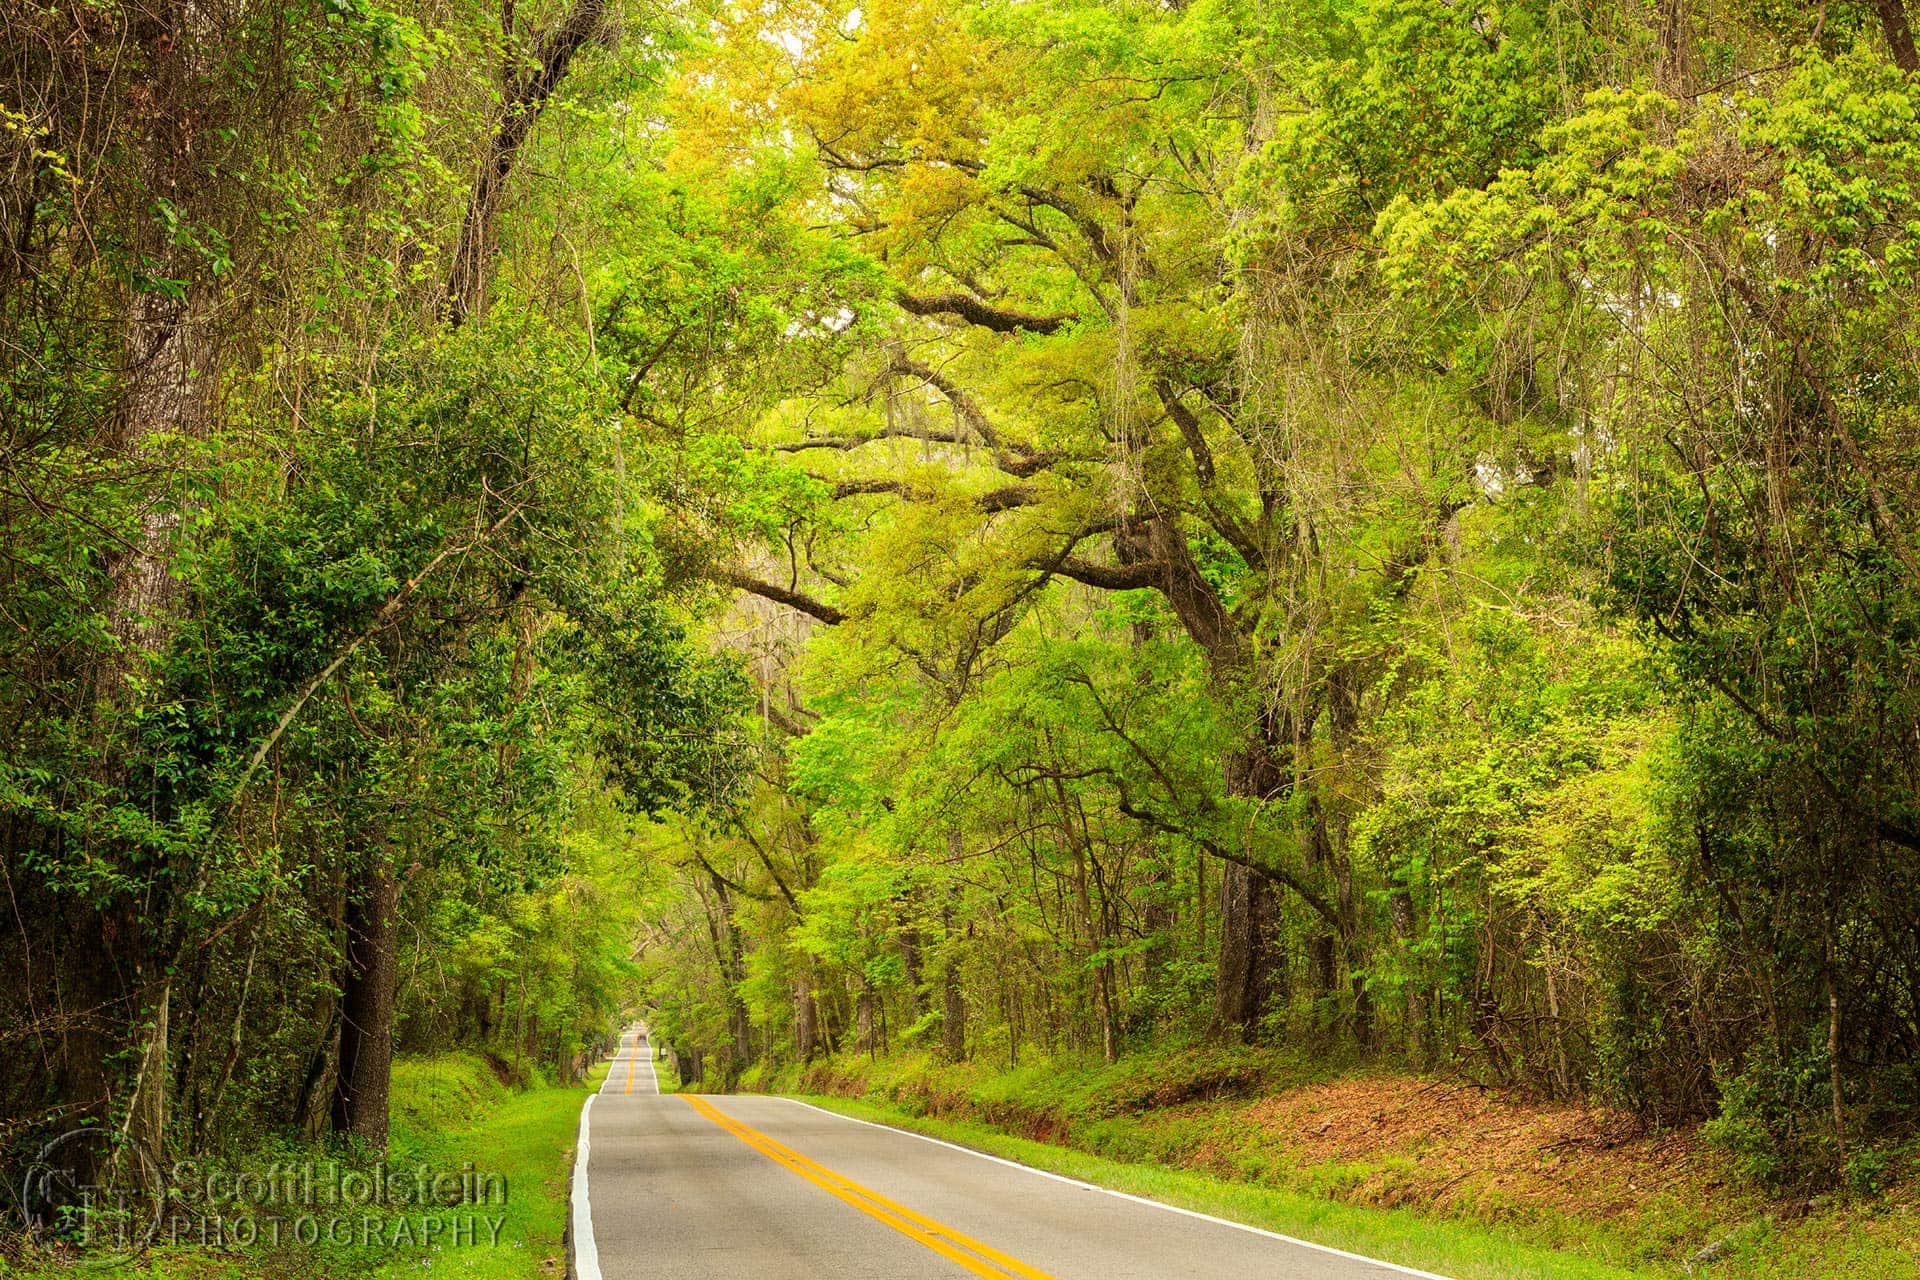 A roadside southern live oak tree with a yellow and green canopy of early spring stands as sentinel over the view down Miccosukee Road, a Tallahassee canopy road.